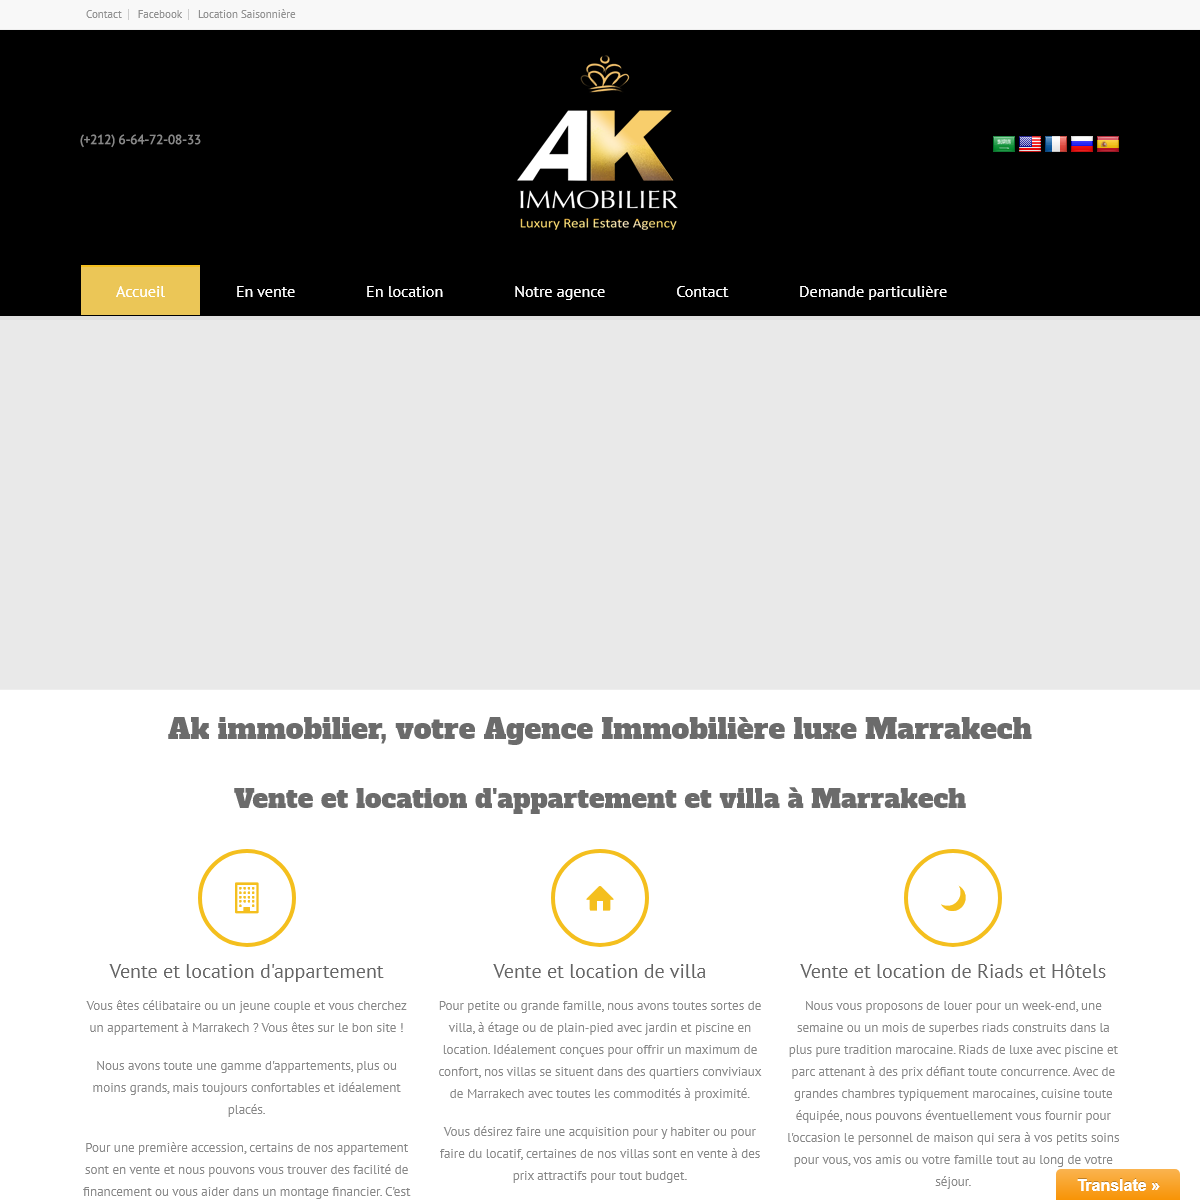 A complete backup of ak-immobilier.com